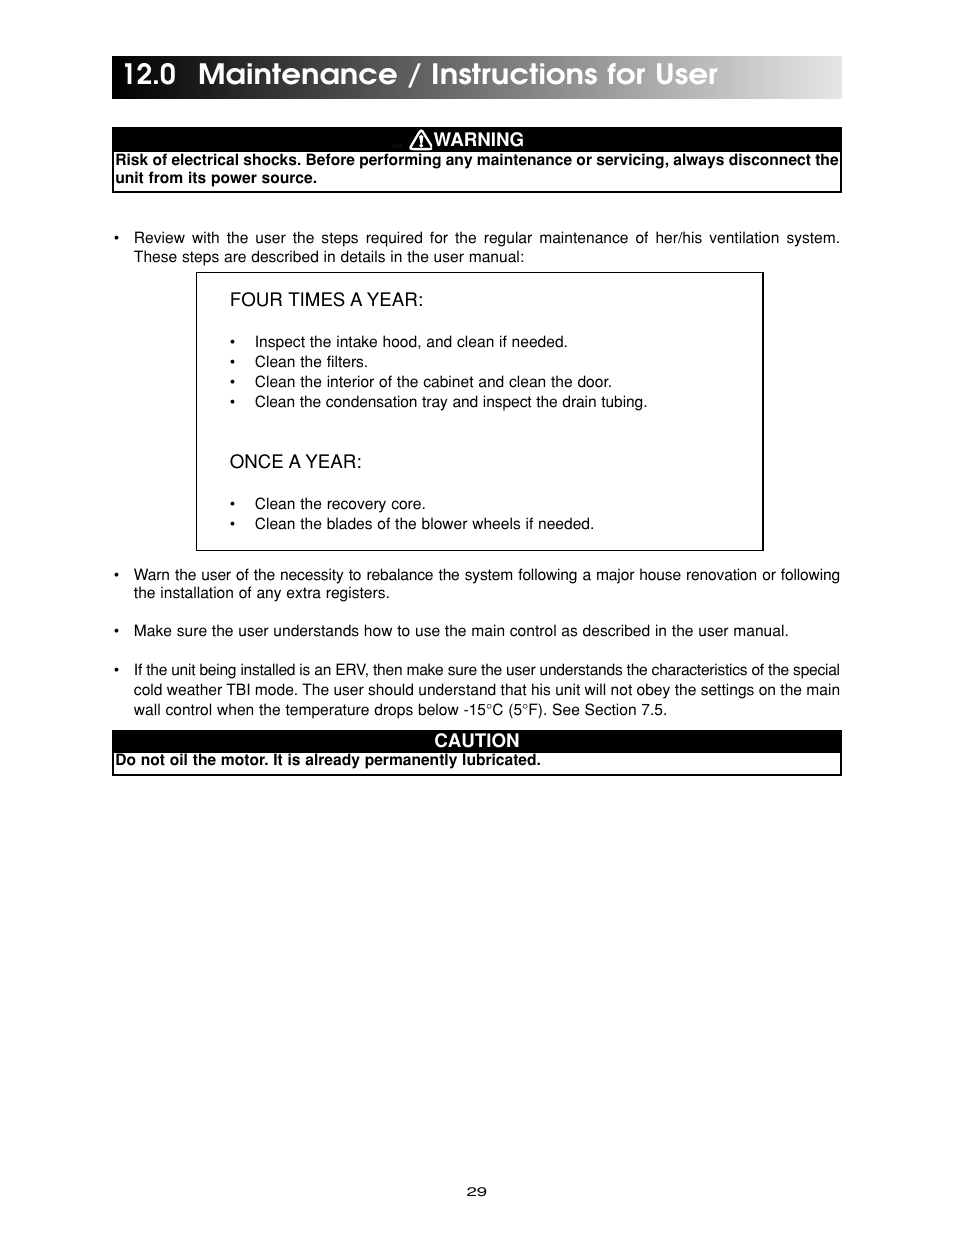 0 maintenance / instructions for user | Maytag Ventilation Systems HRV-210 User Manual | Page 29 / 32